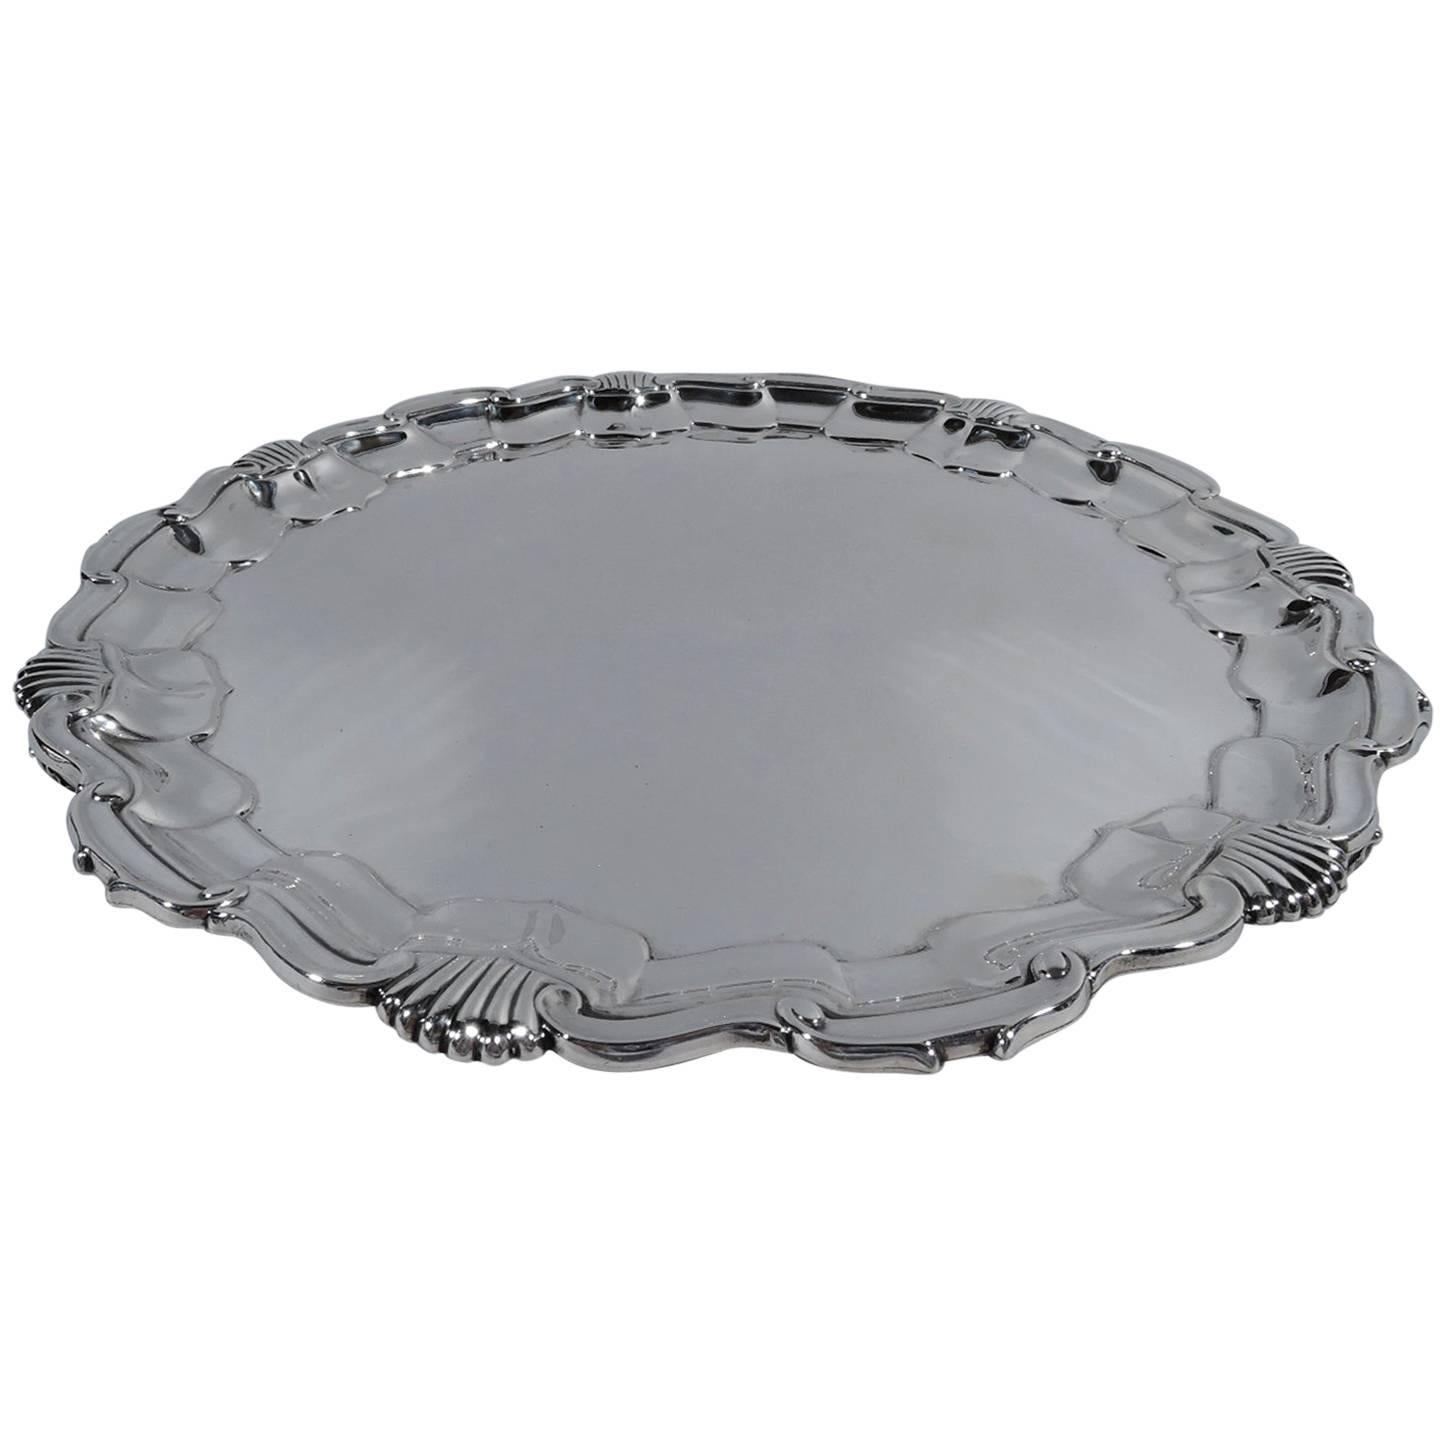 English Sterling Silver Salver Tray with Georgian Shell and Scroll Rim